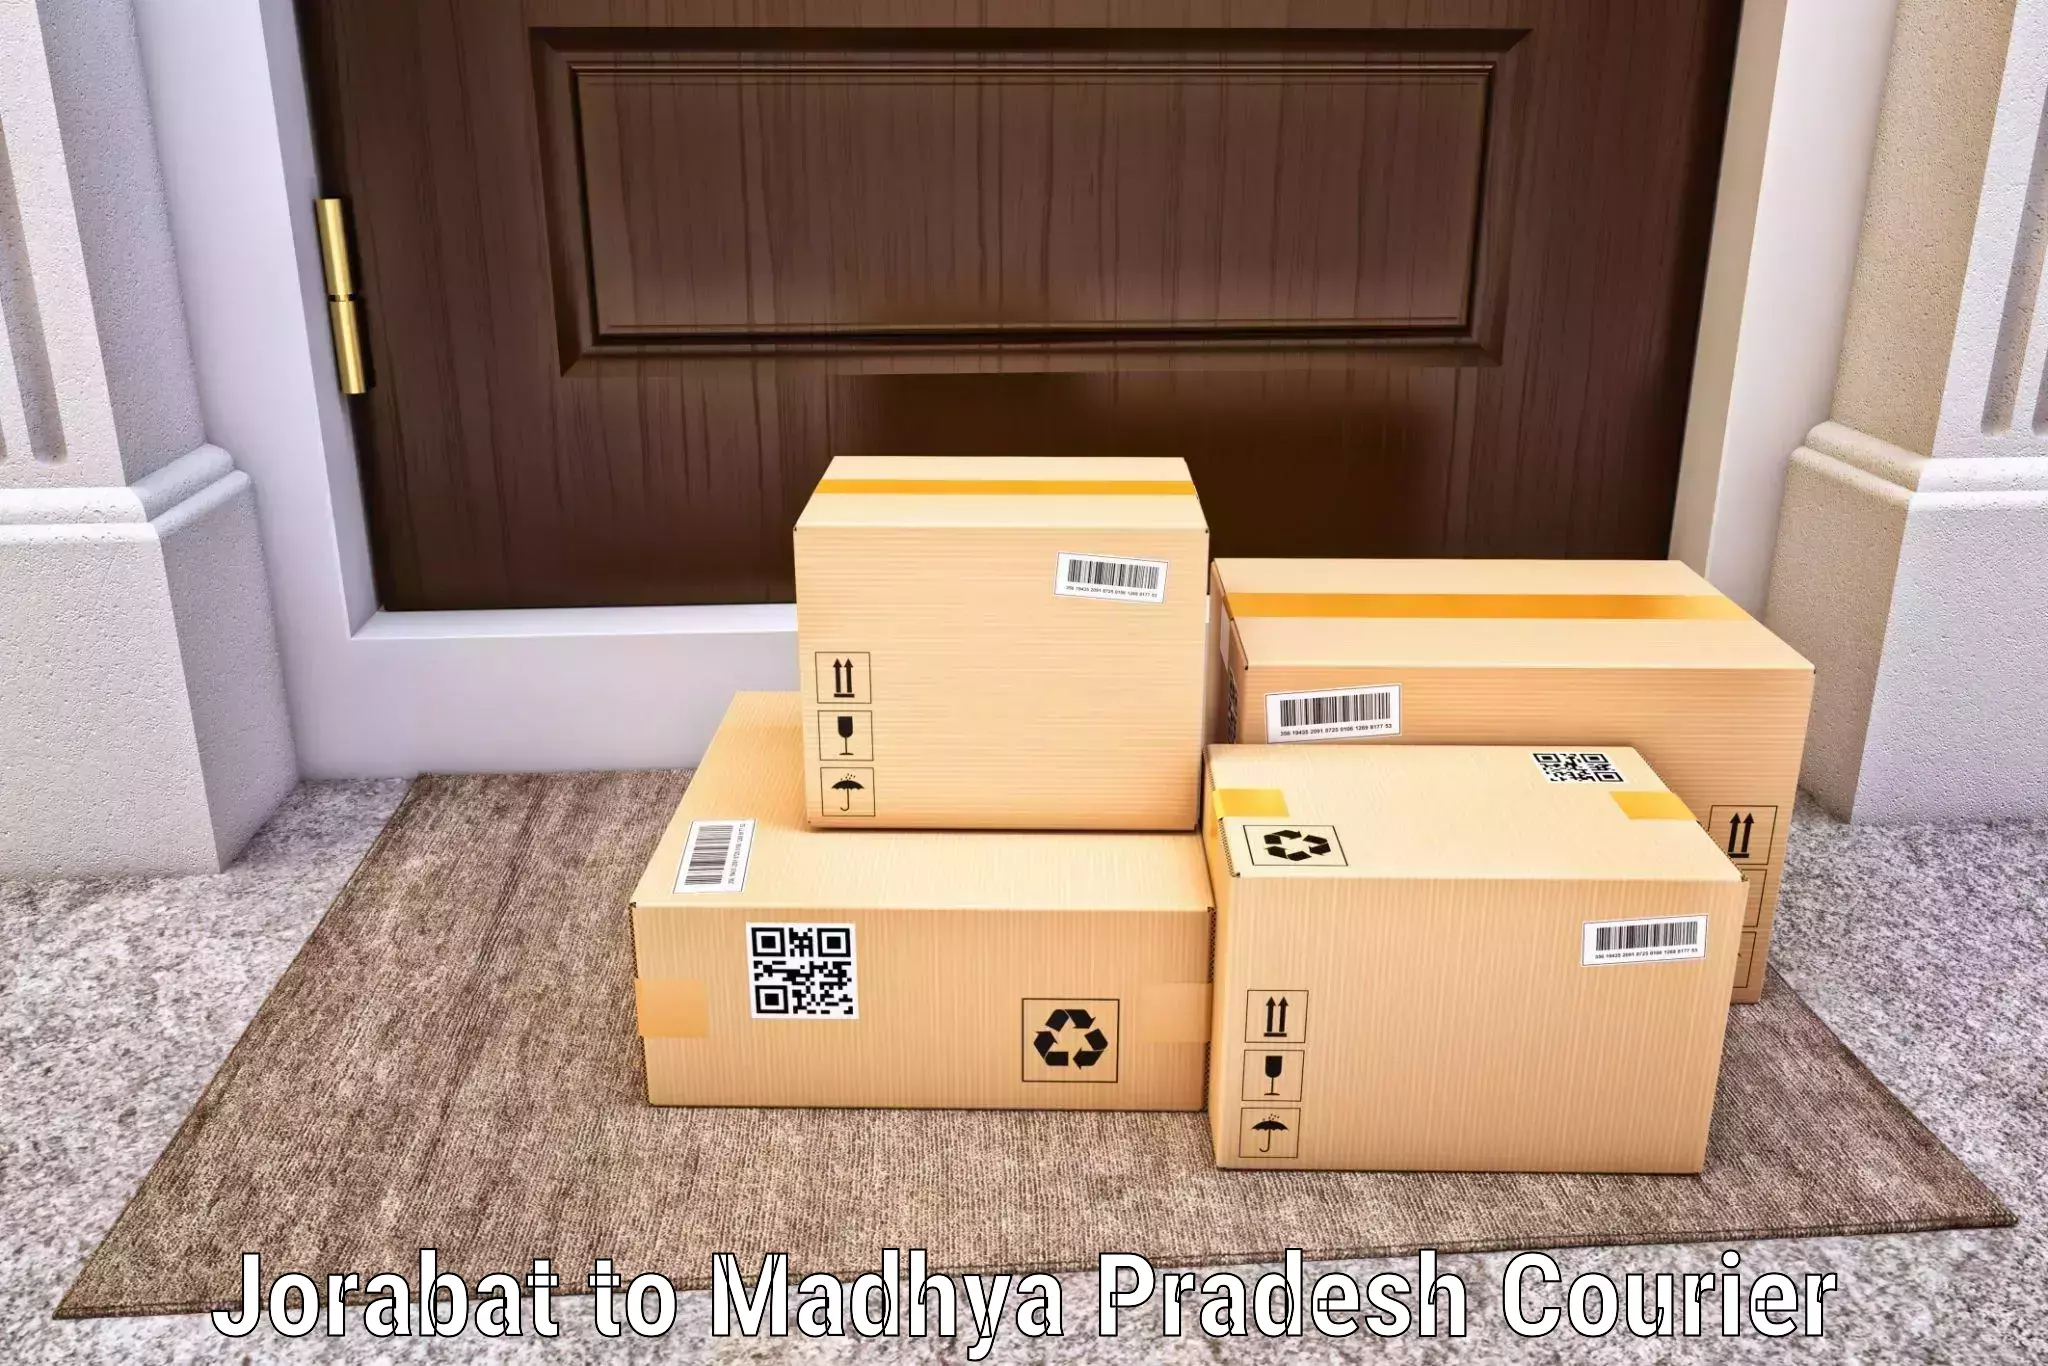 Full-service courier options Jorabat to Bhopal